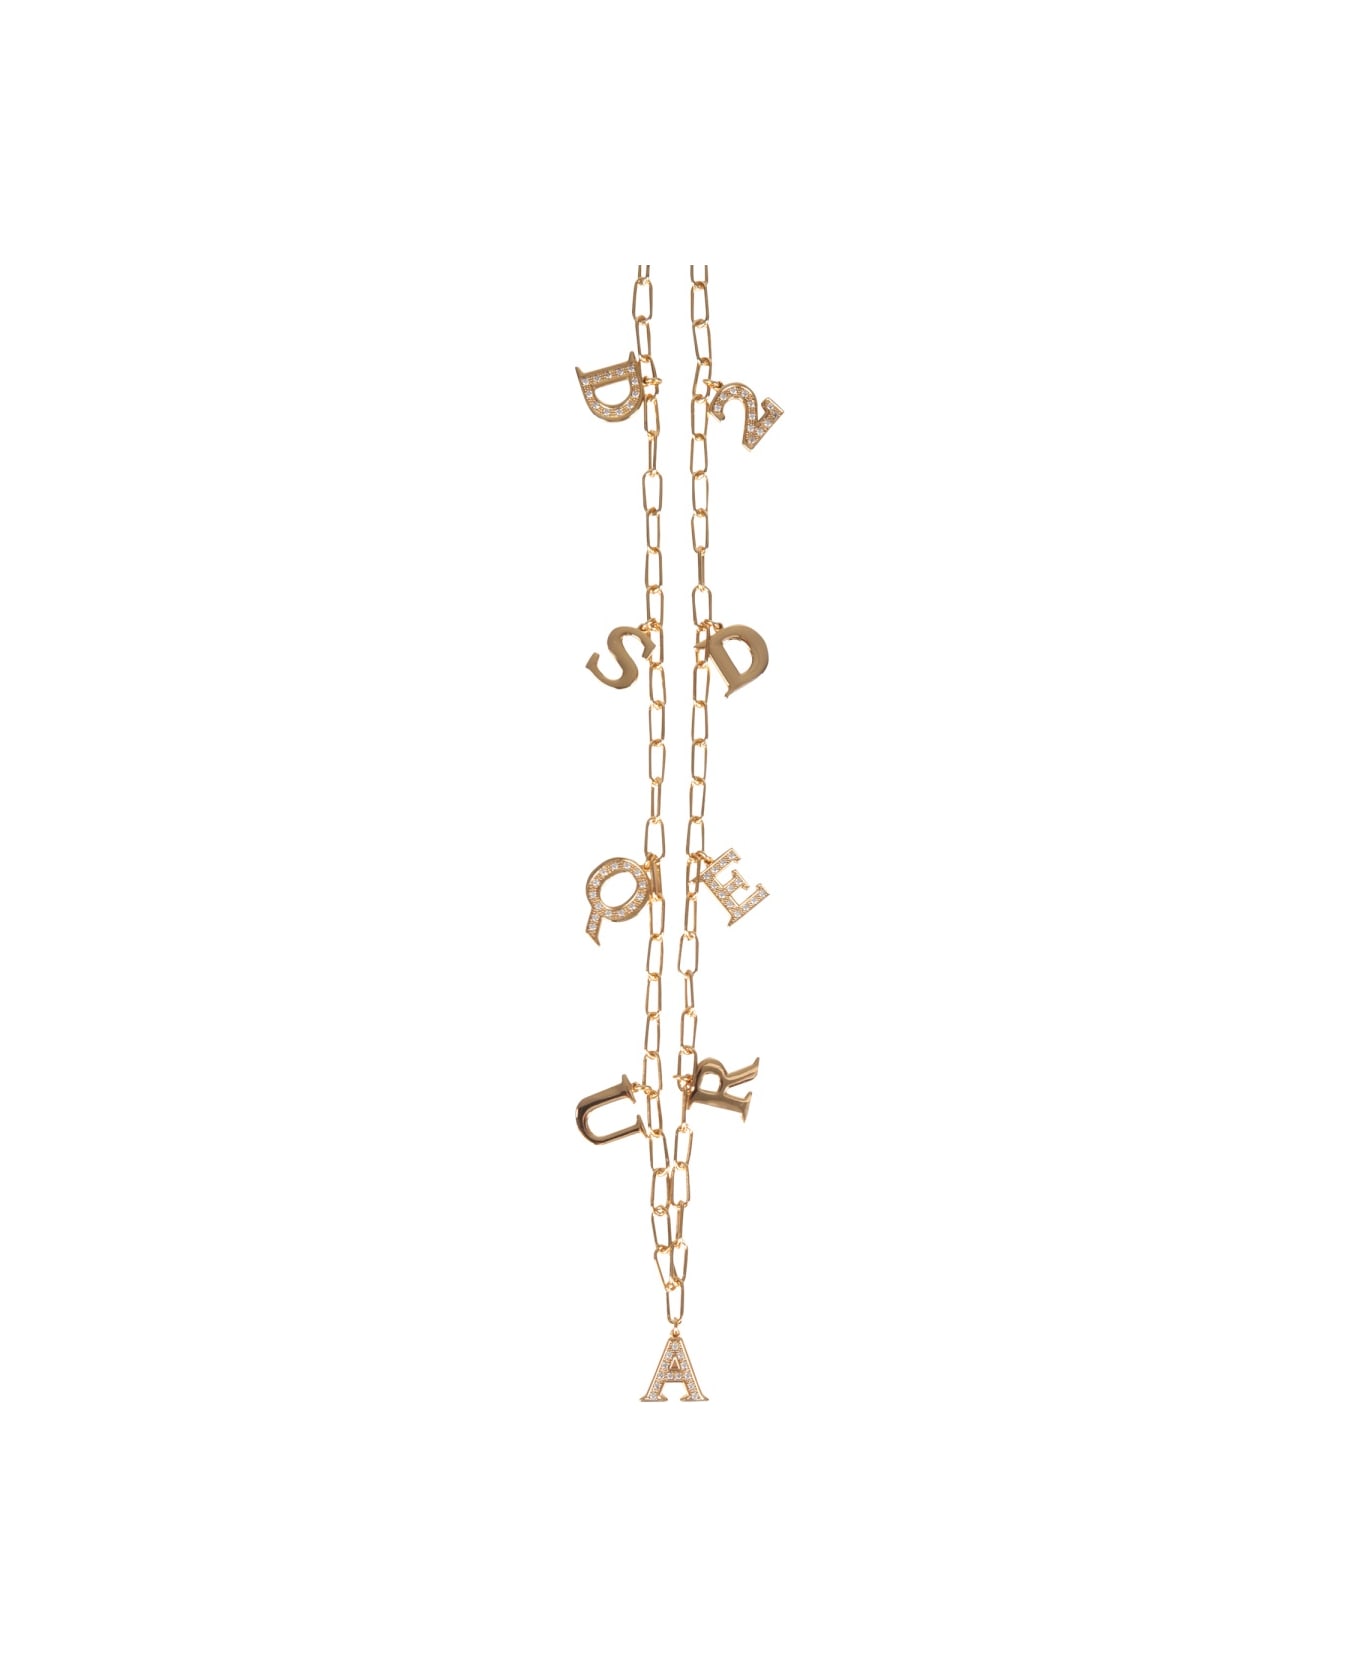 Dsquared2 Charmy Necklace - GOLD